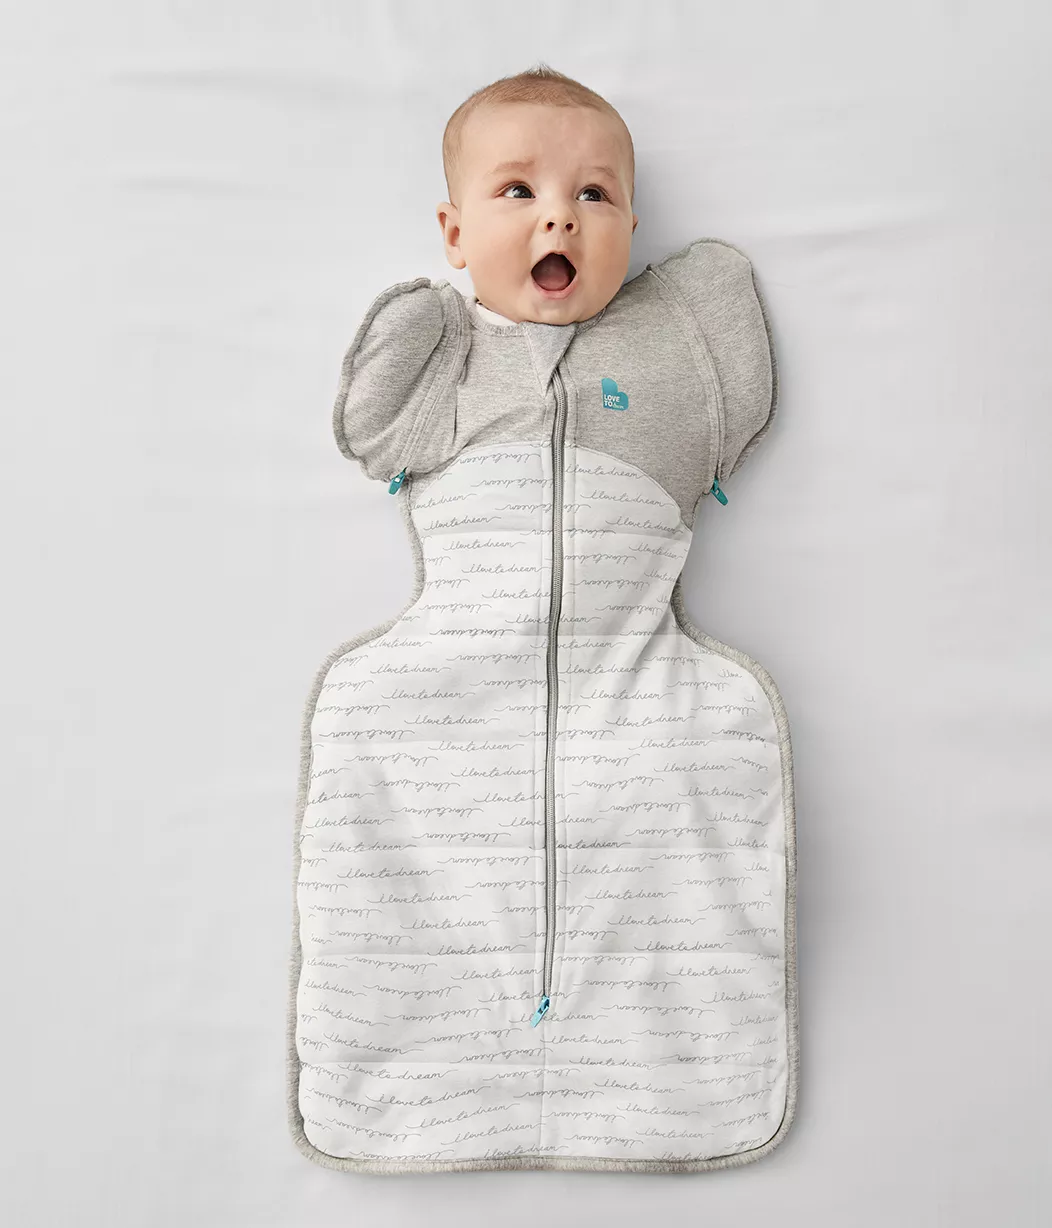 Swaddle Up™ Ready-to-Roll Starter Pack (3 Pieces)